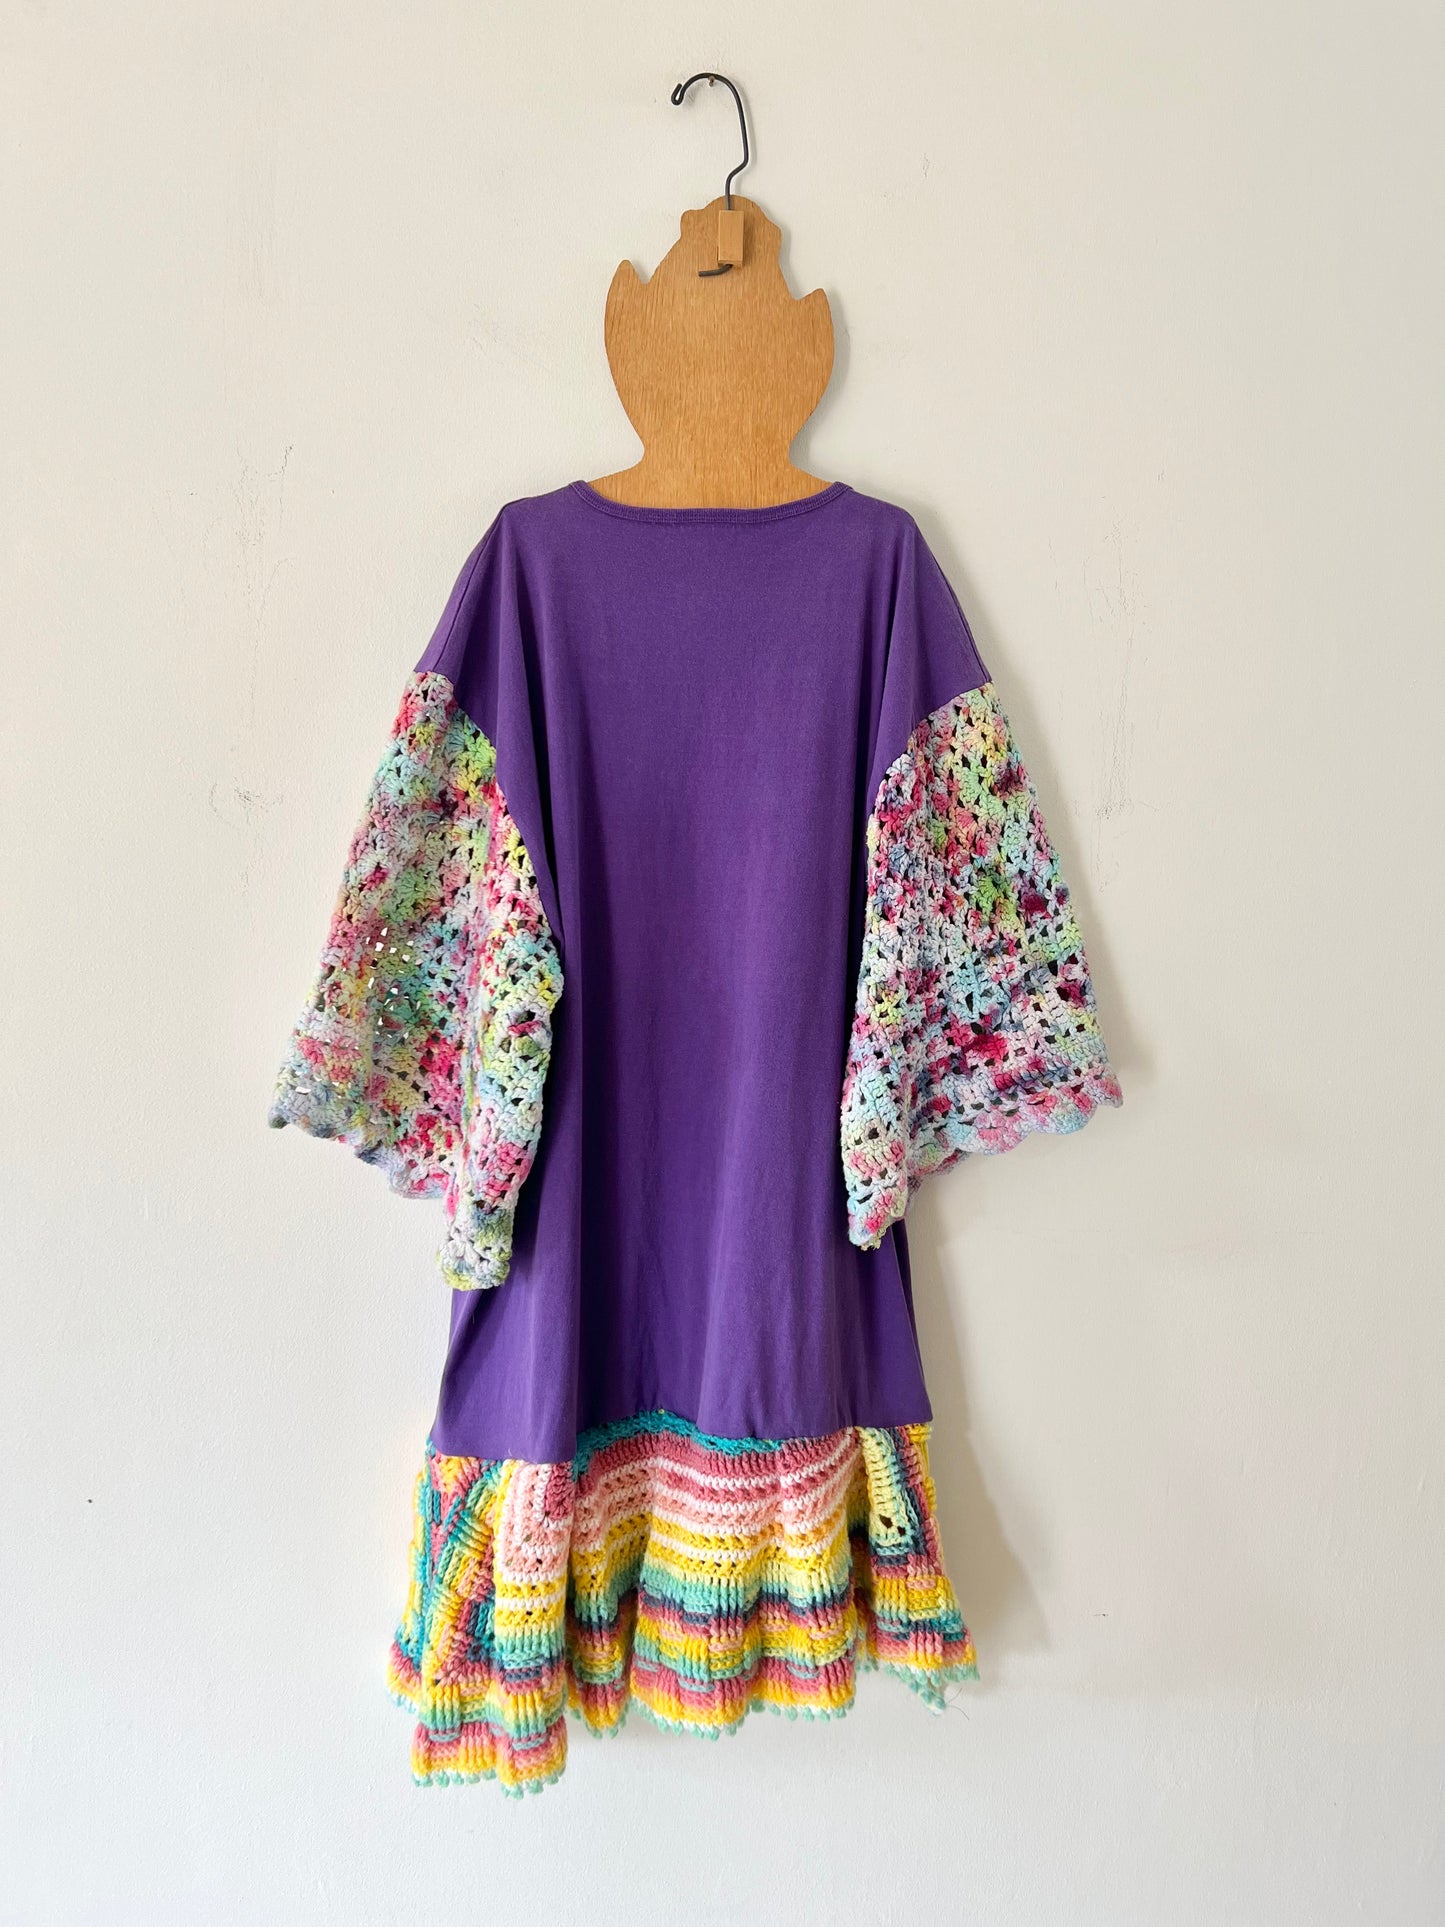 Reworked by me ‘A Fine Pair’ Afghan Dress